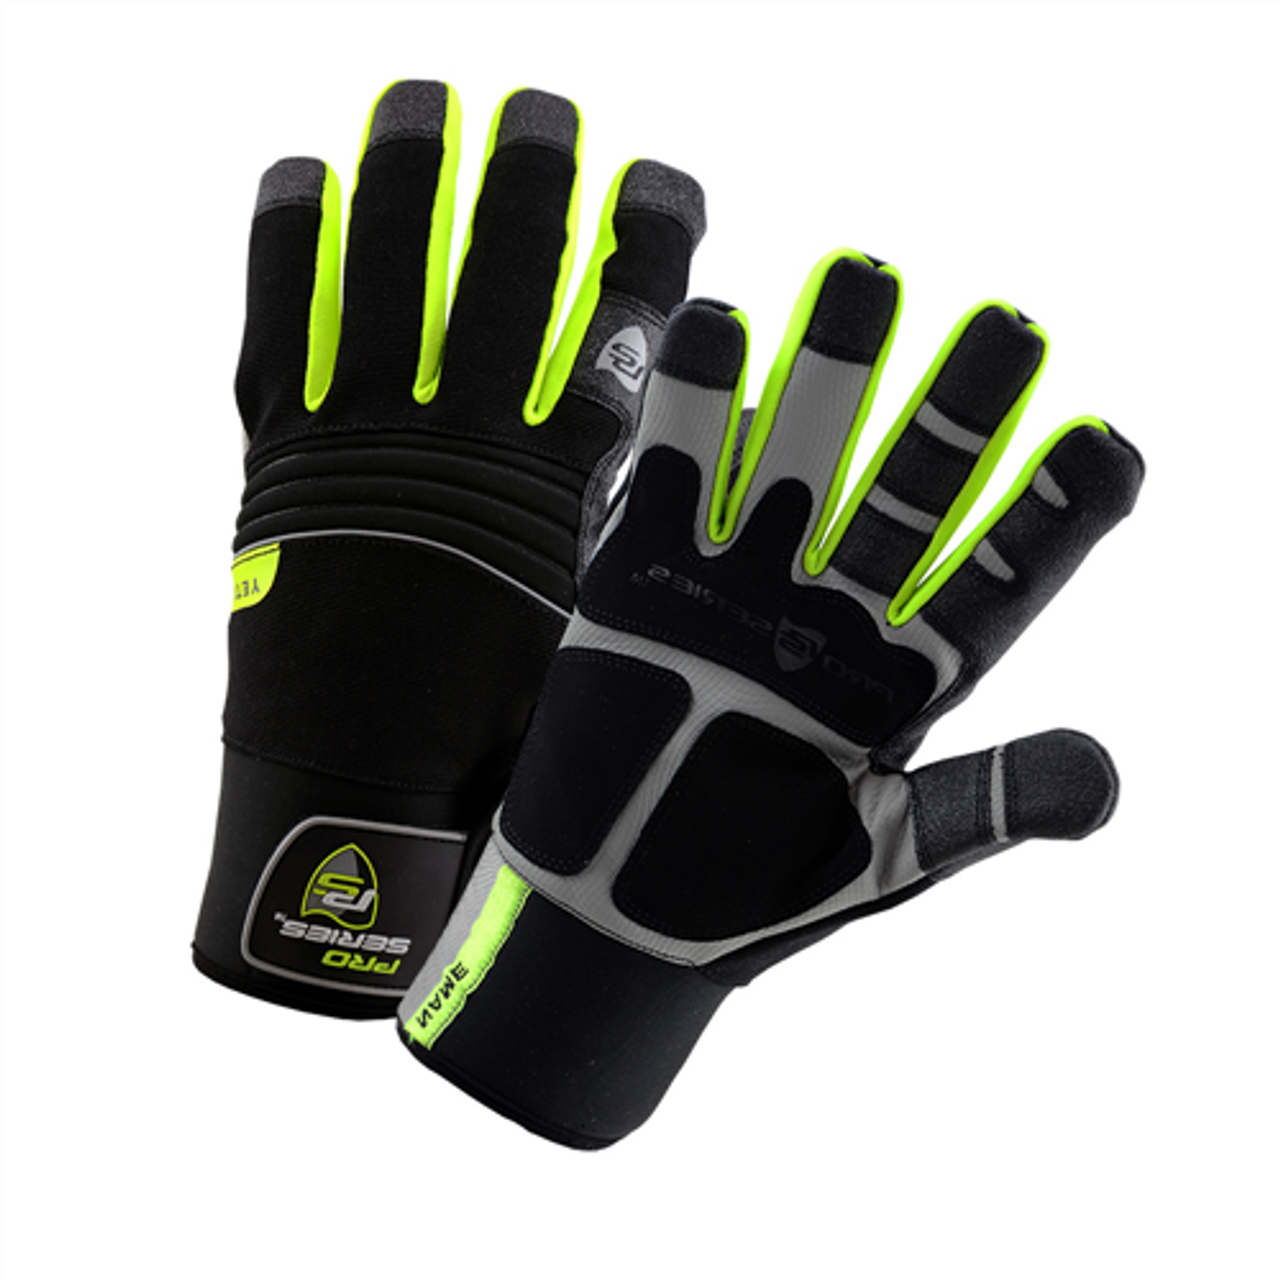 West Chester 96652/XL Hi-Vis Yeti, Leather Palm Gloves, Waterproof, Fleece Lined, Size X-Large